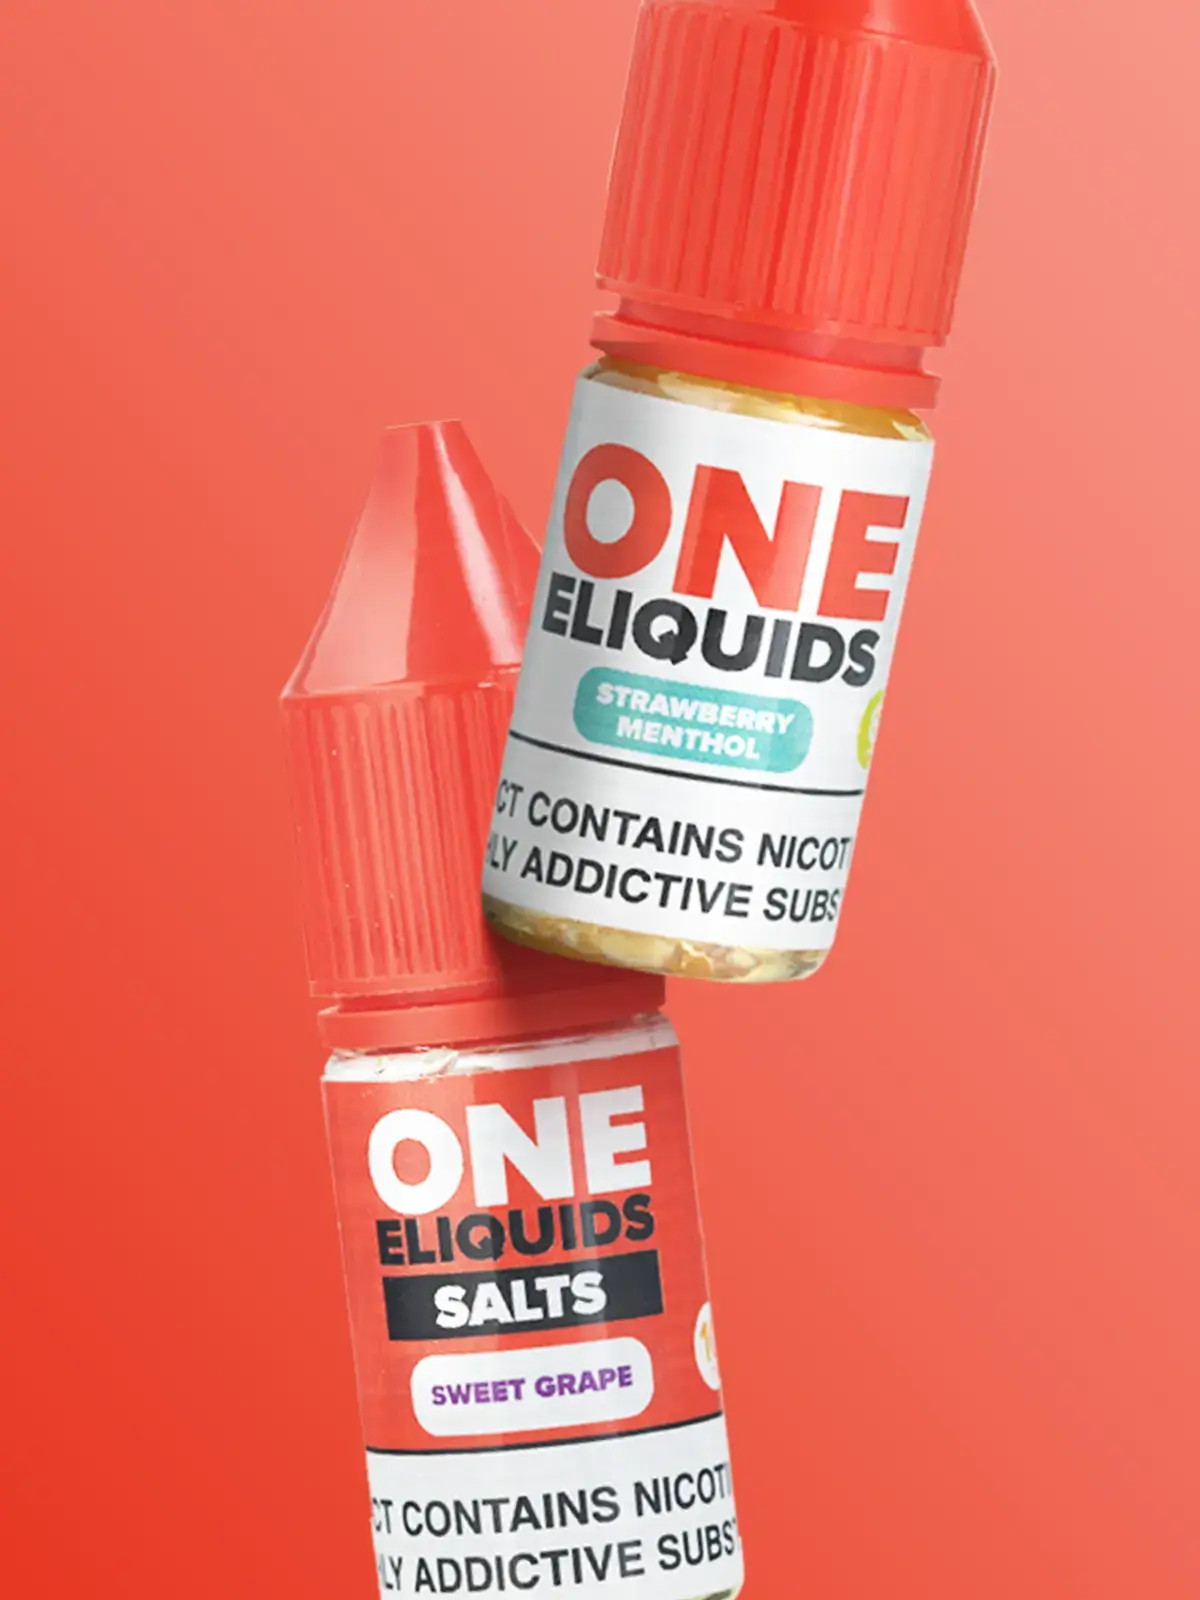 Two bottles of One E-Liquids; Strawberry Menthol and Sweet Grape flavours, floating in front of a red background